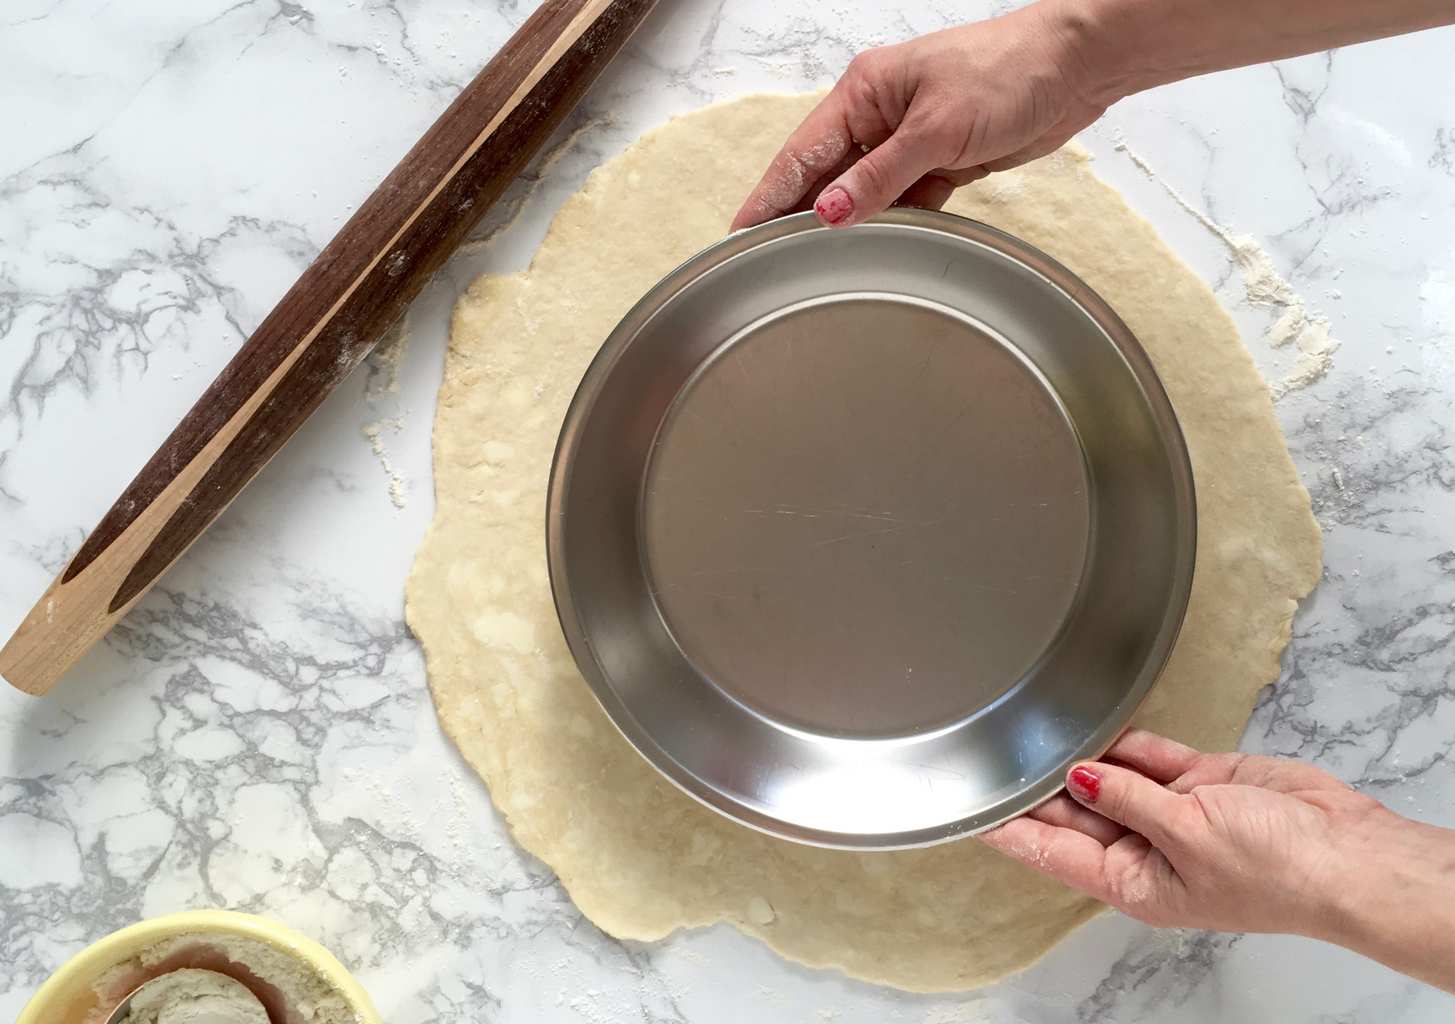 Rolling the perfect pie crust Measuring pan to dough